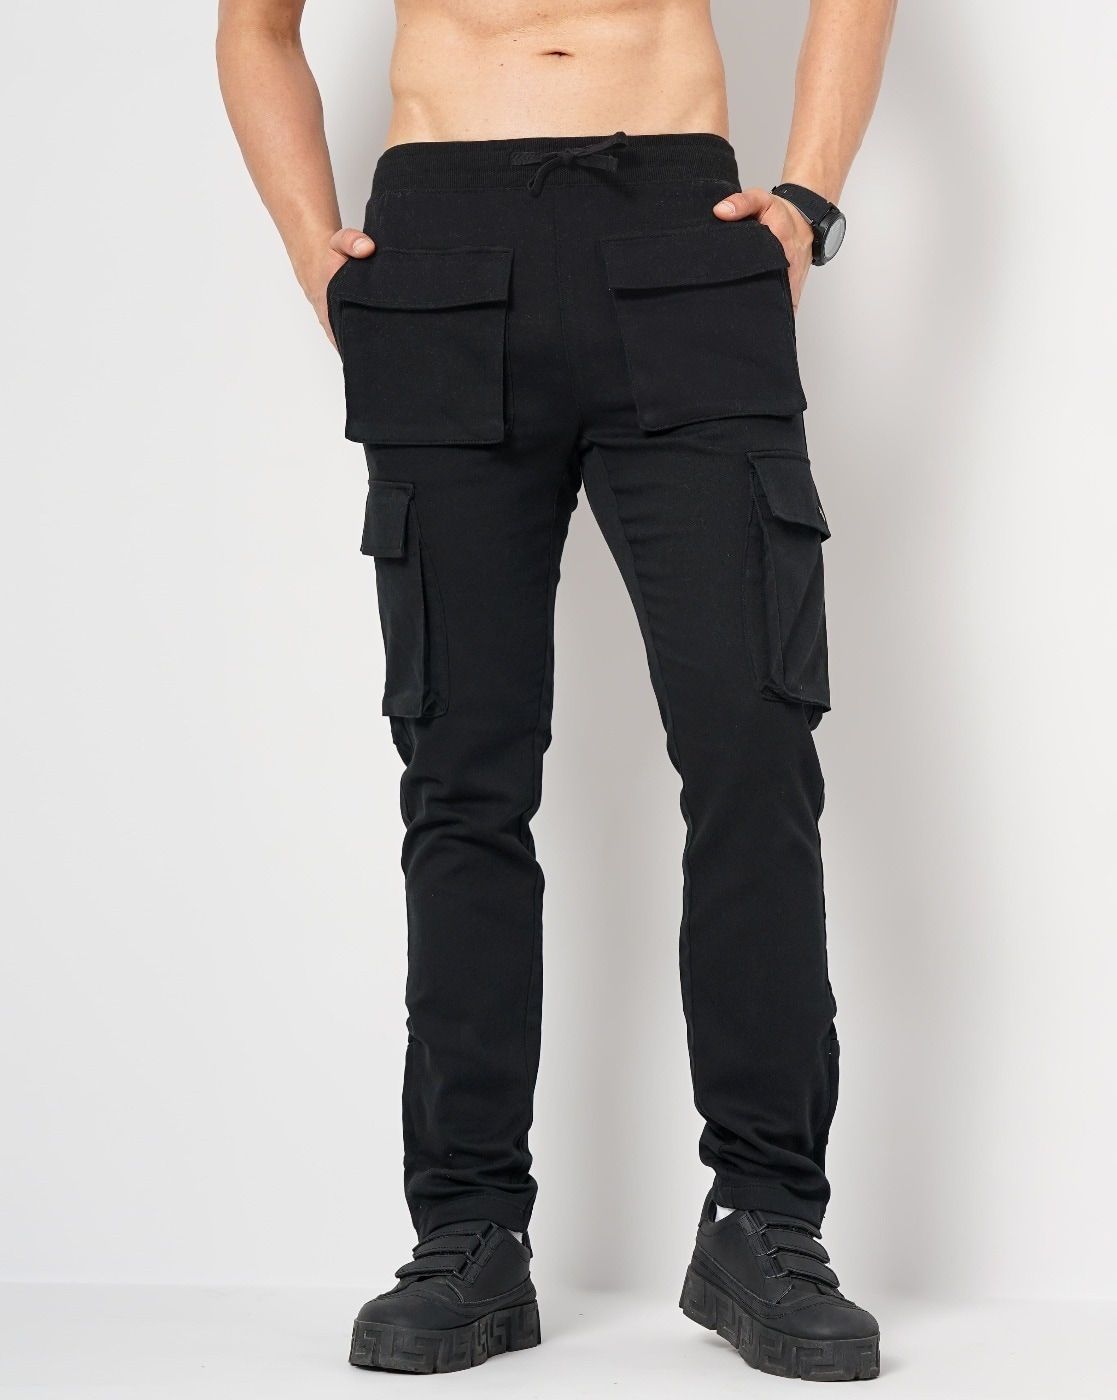 Buy URBAN INDY Genuine Cotton Twill Men's 2 Pocket Cargo Pants - Stylish  and Functional Comfortable Cargos for Men, Trousers Baggy Fit Design  (S_Black) at Amazon.in